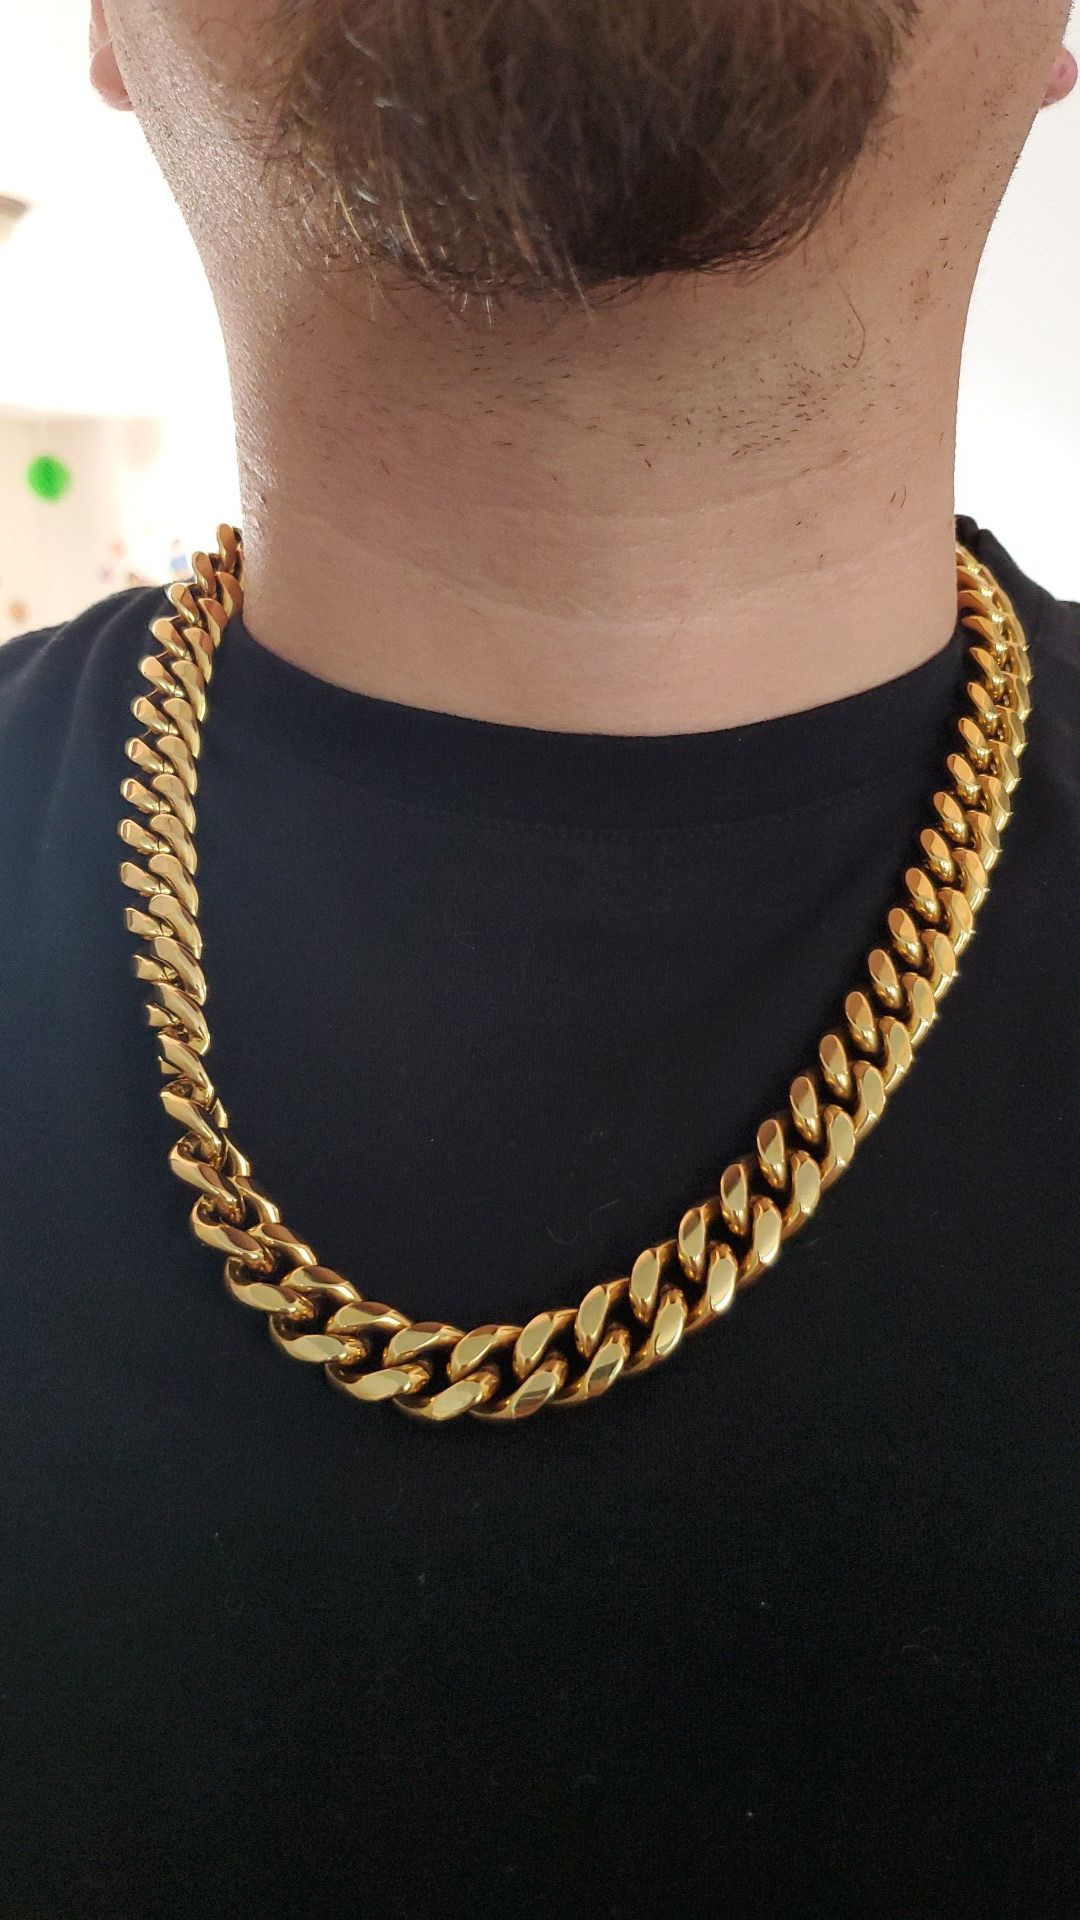 Stainless steel gold chain 24 inch